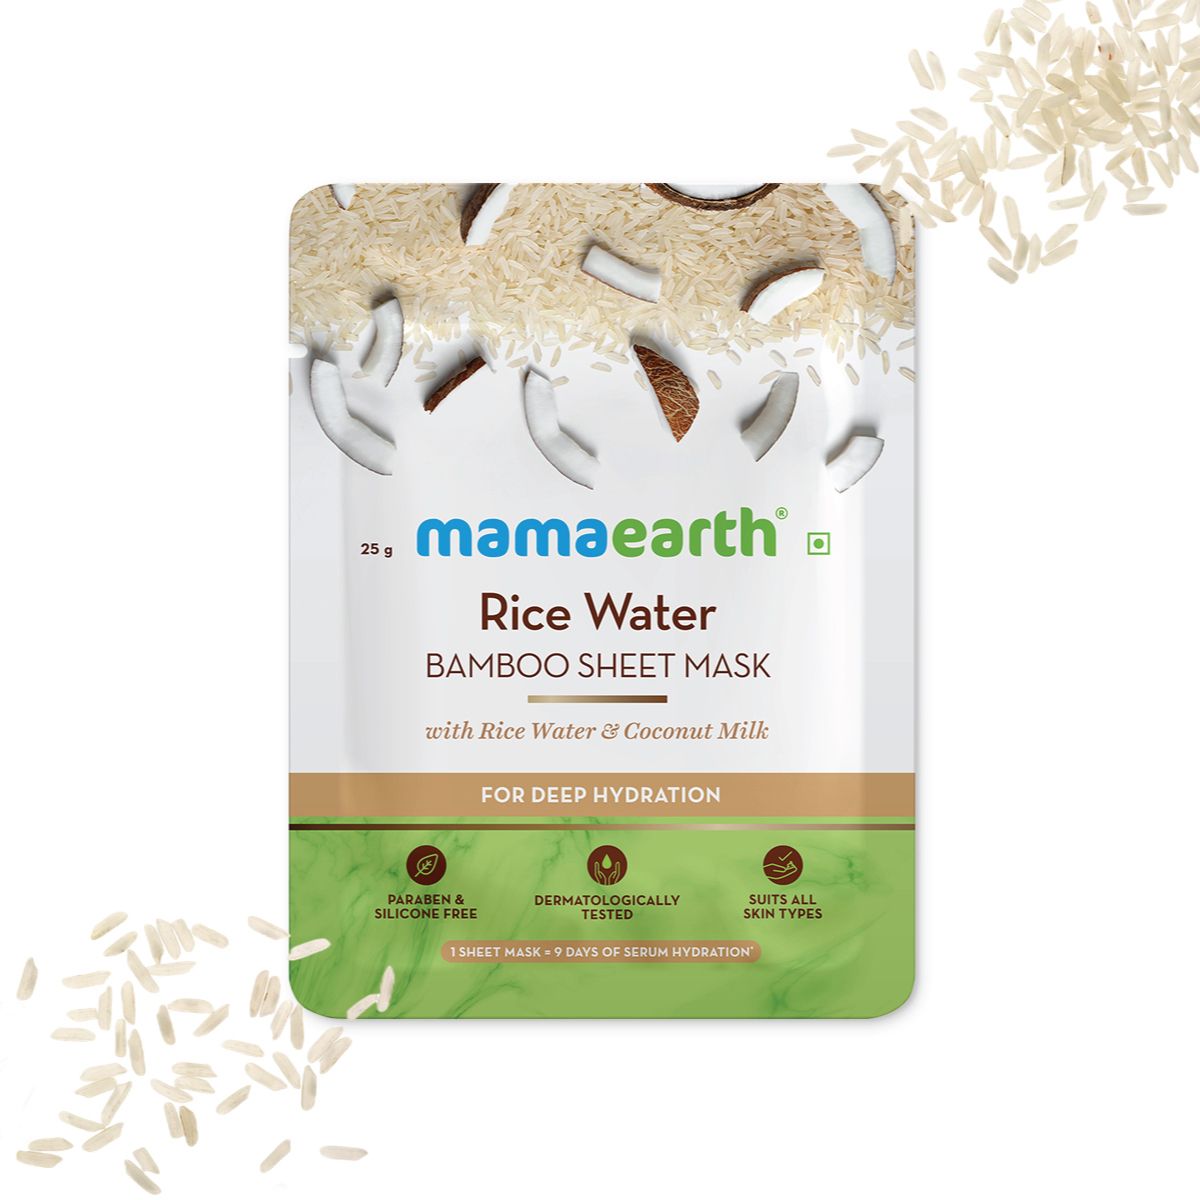 Mamaearth Rice Water Bamboo Sheet Mask Better Than Others Available in The Market